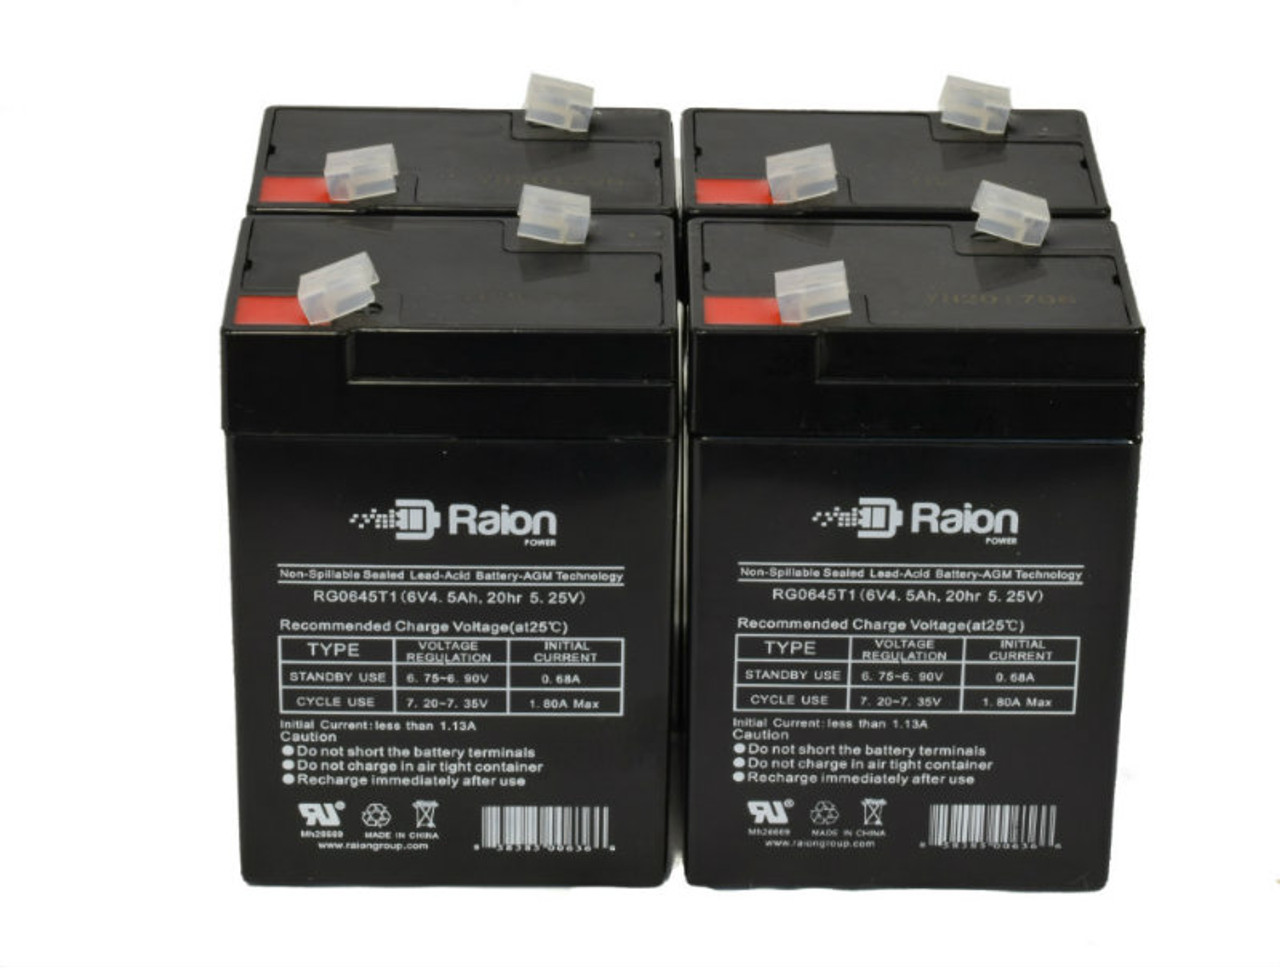 Raion Power 6 Volt 4.5Ah RG0645T1 Replacement Battery for Sigmas SP6-6 - 4 Pack